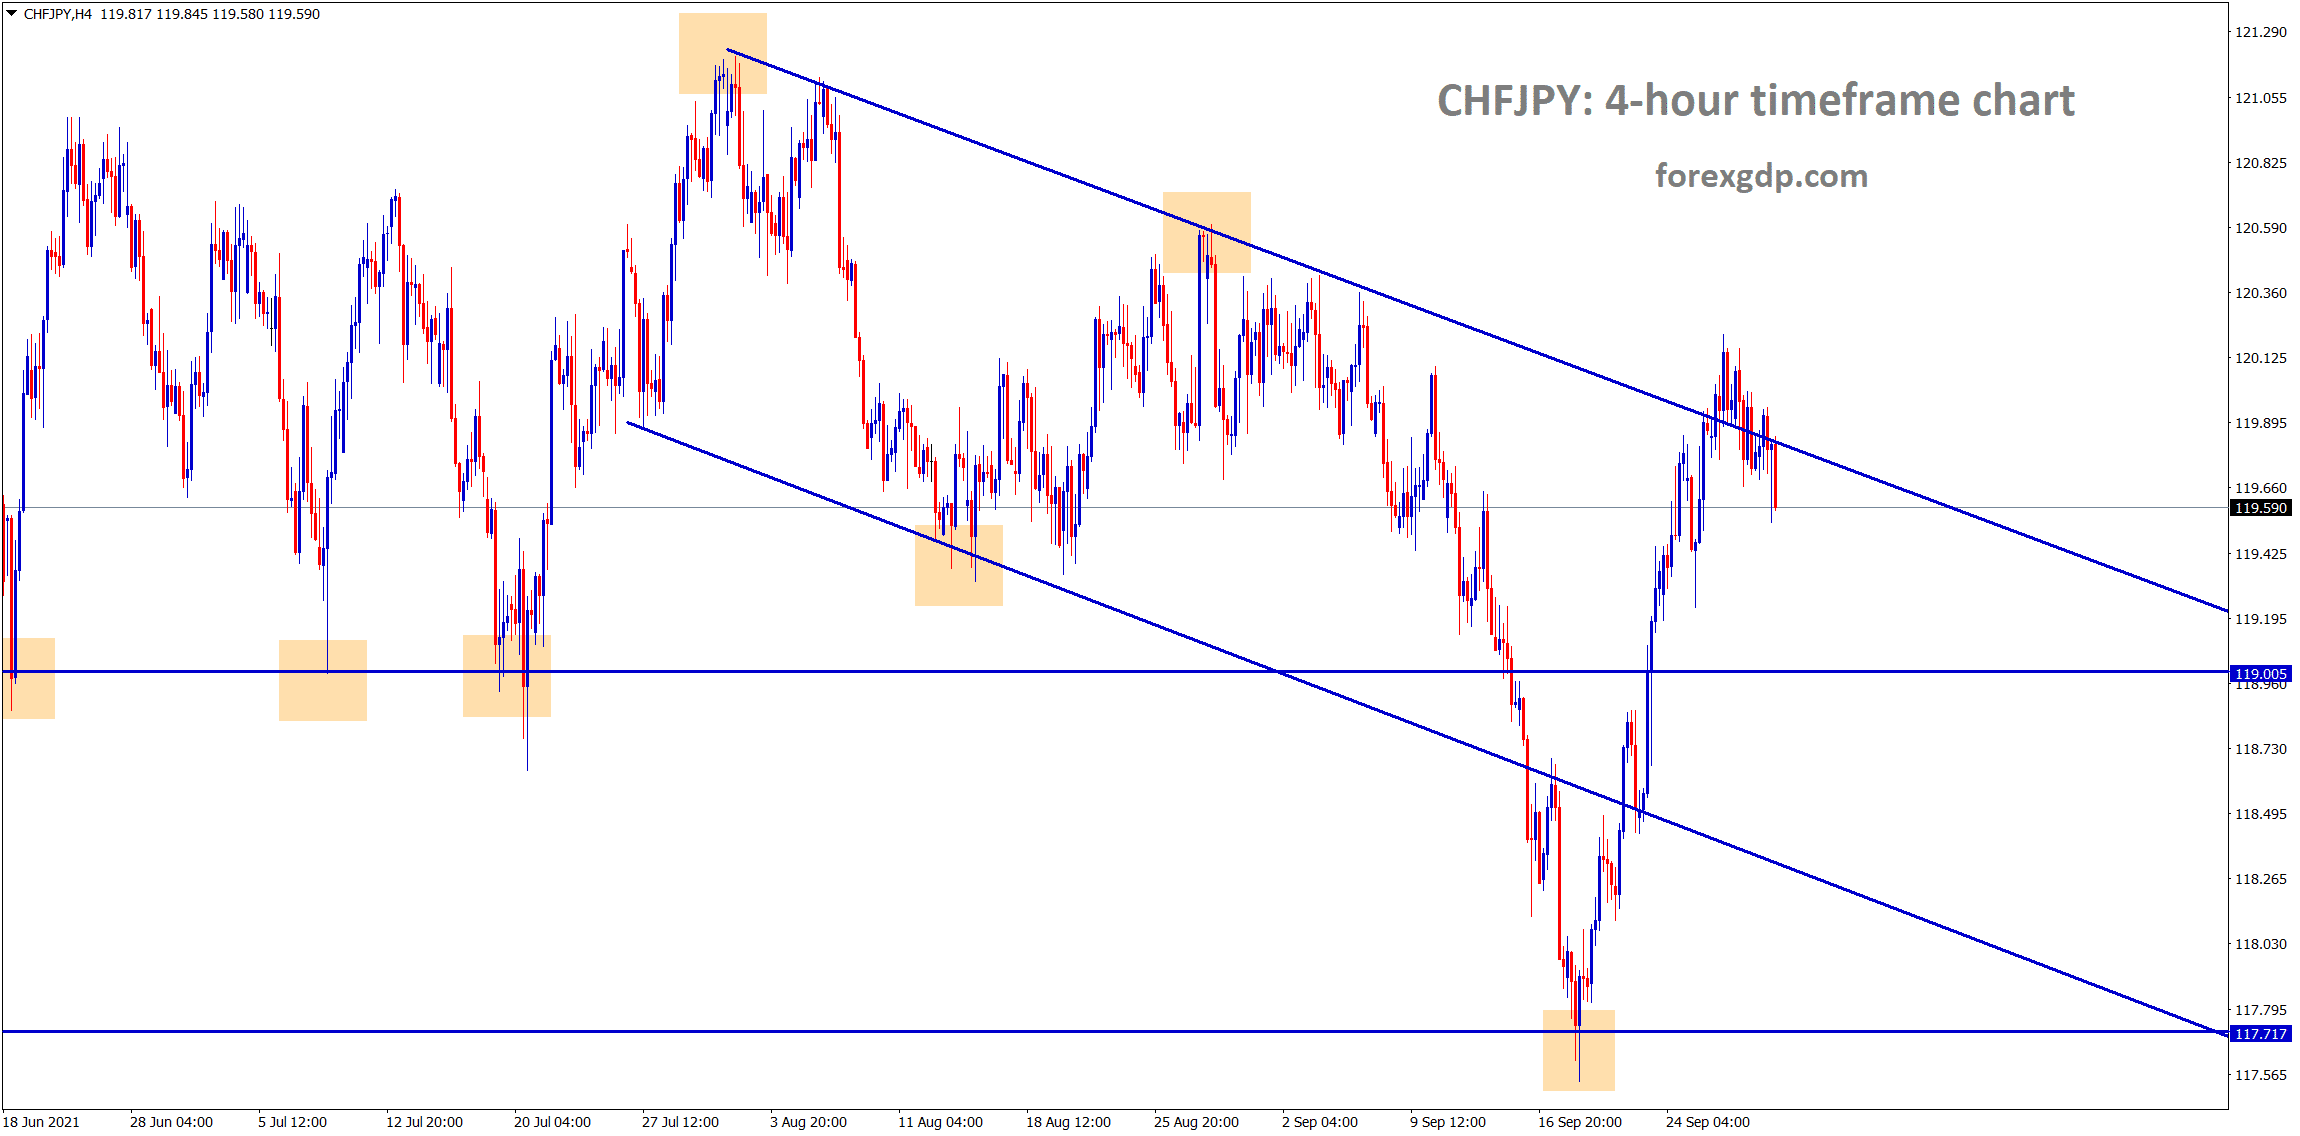 CHFJPY is trying to fall from the lower high area of the downtrend line